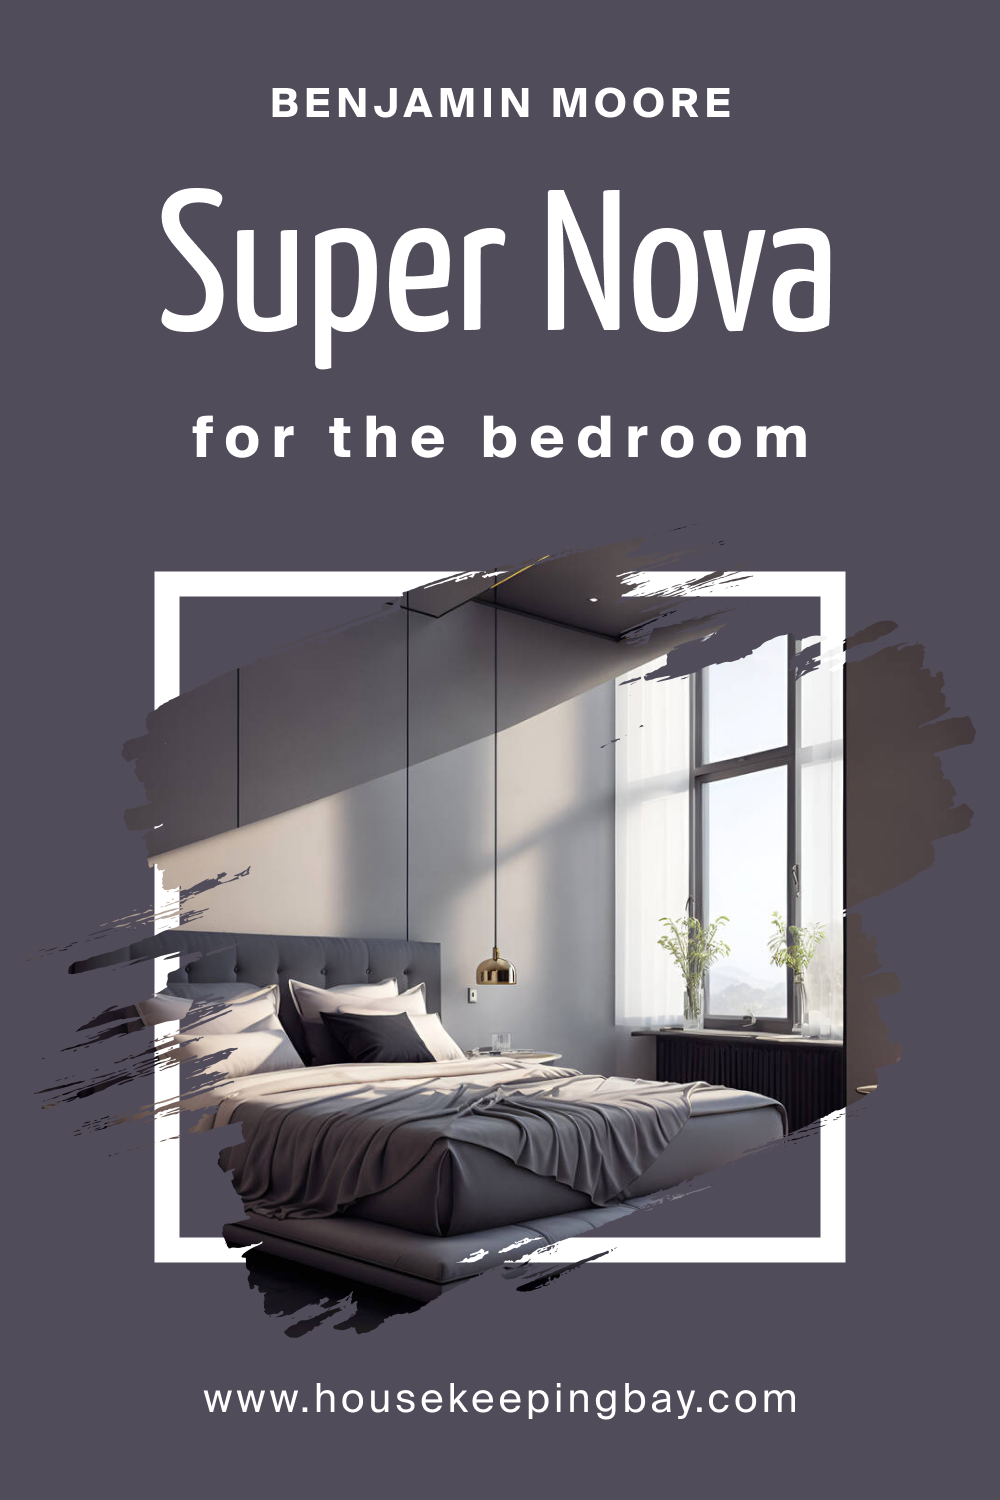 How to Use Super Nova 1414 in the Bedroom?